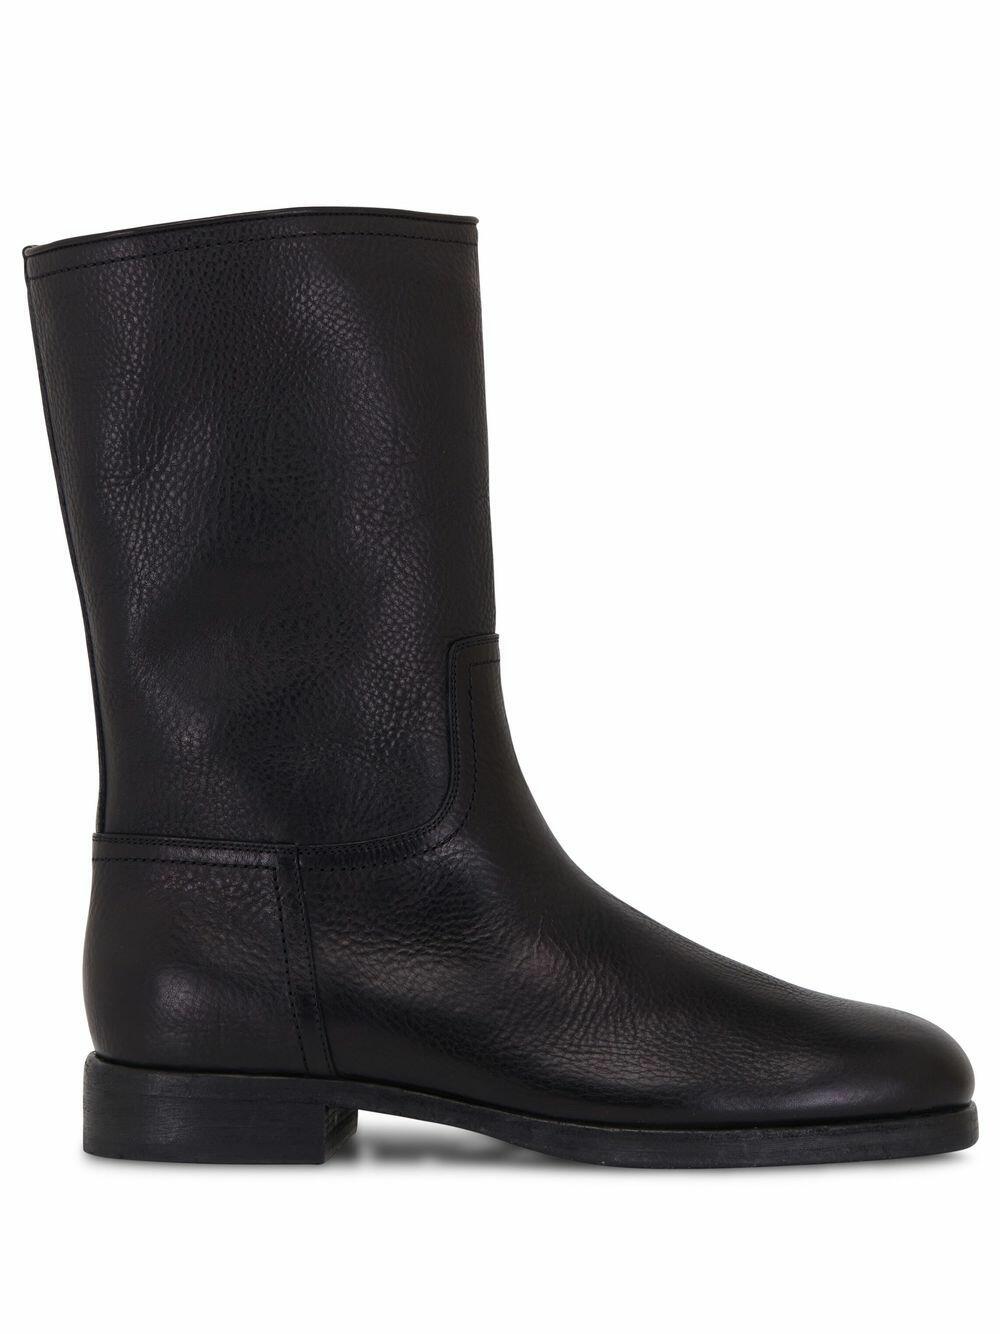 The Row - Ranger Black Leather Short Boot, 25mm